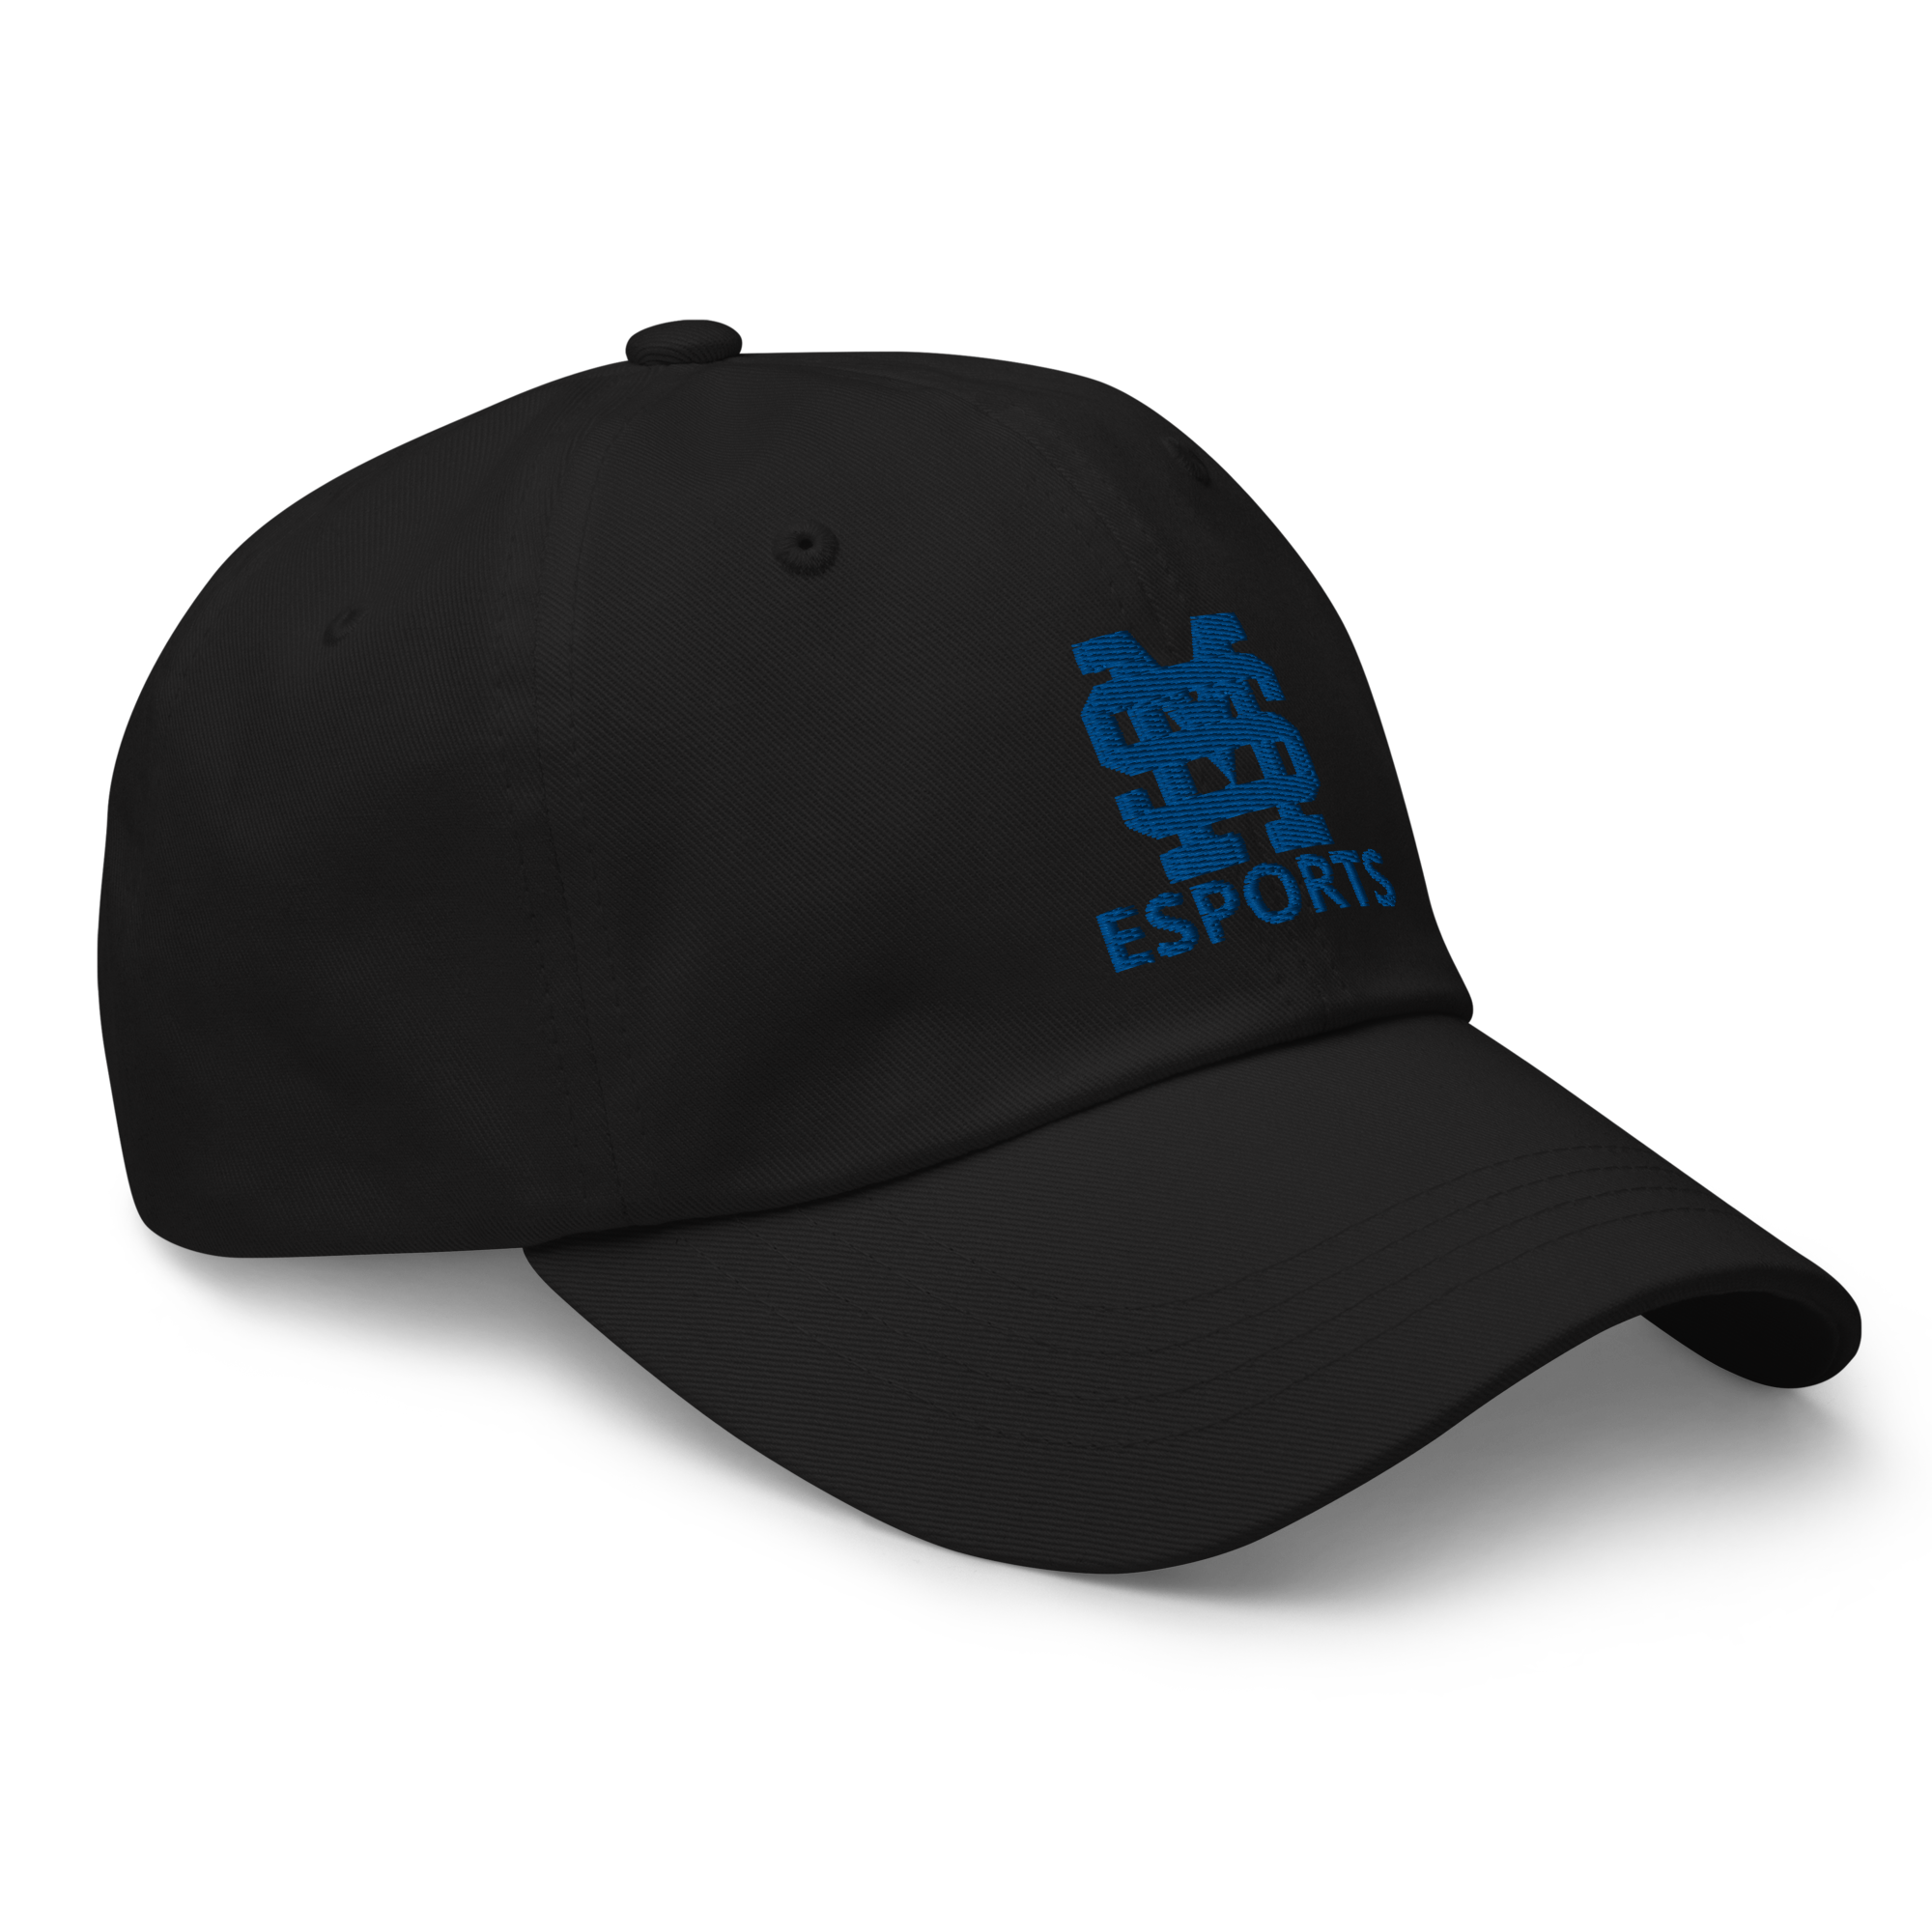 Mona Shores High School | On Demand | Embroidered Dad hat